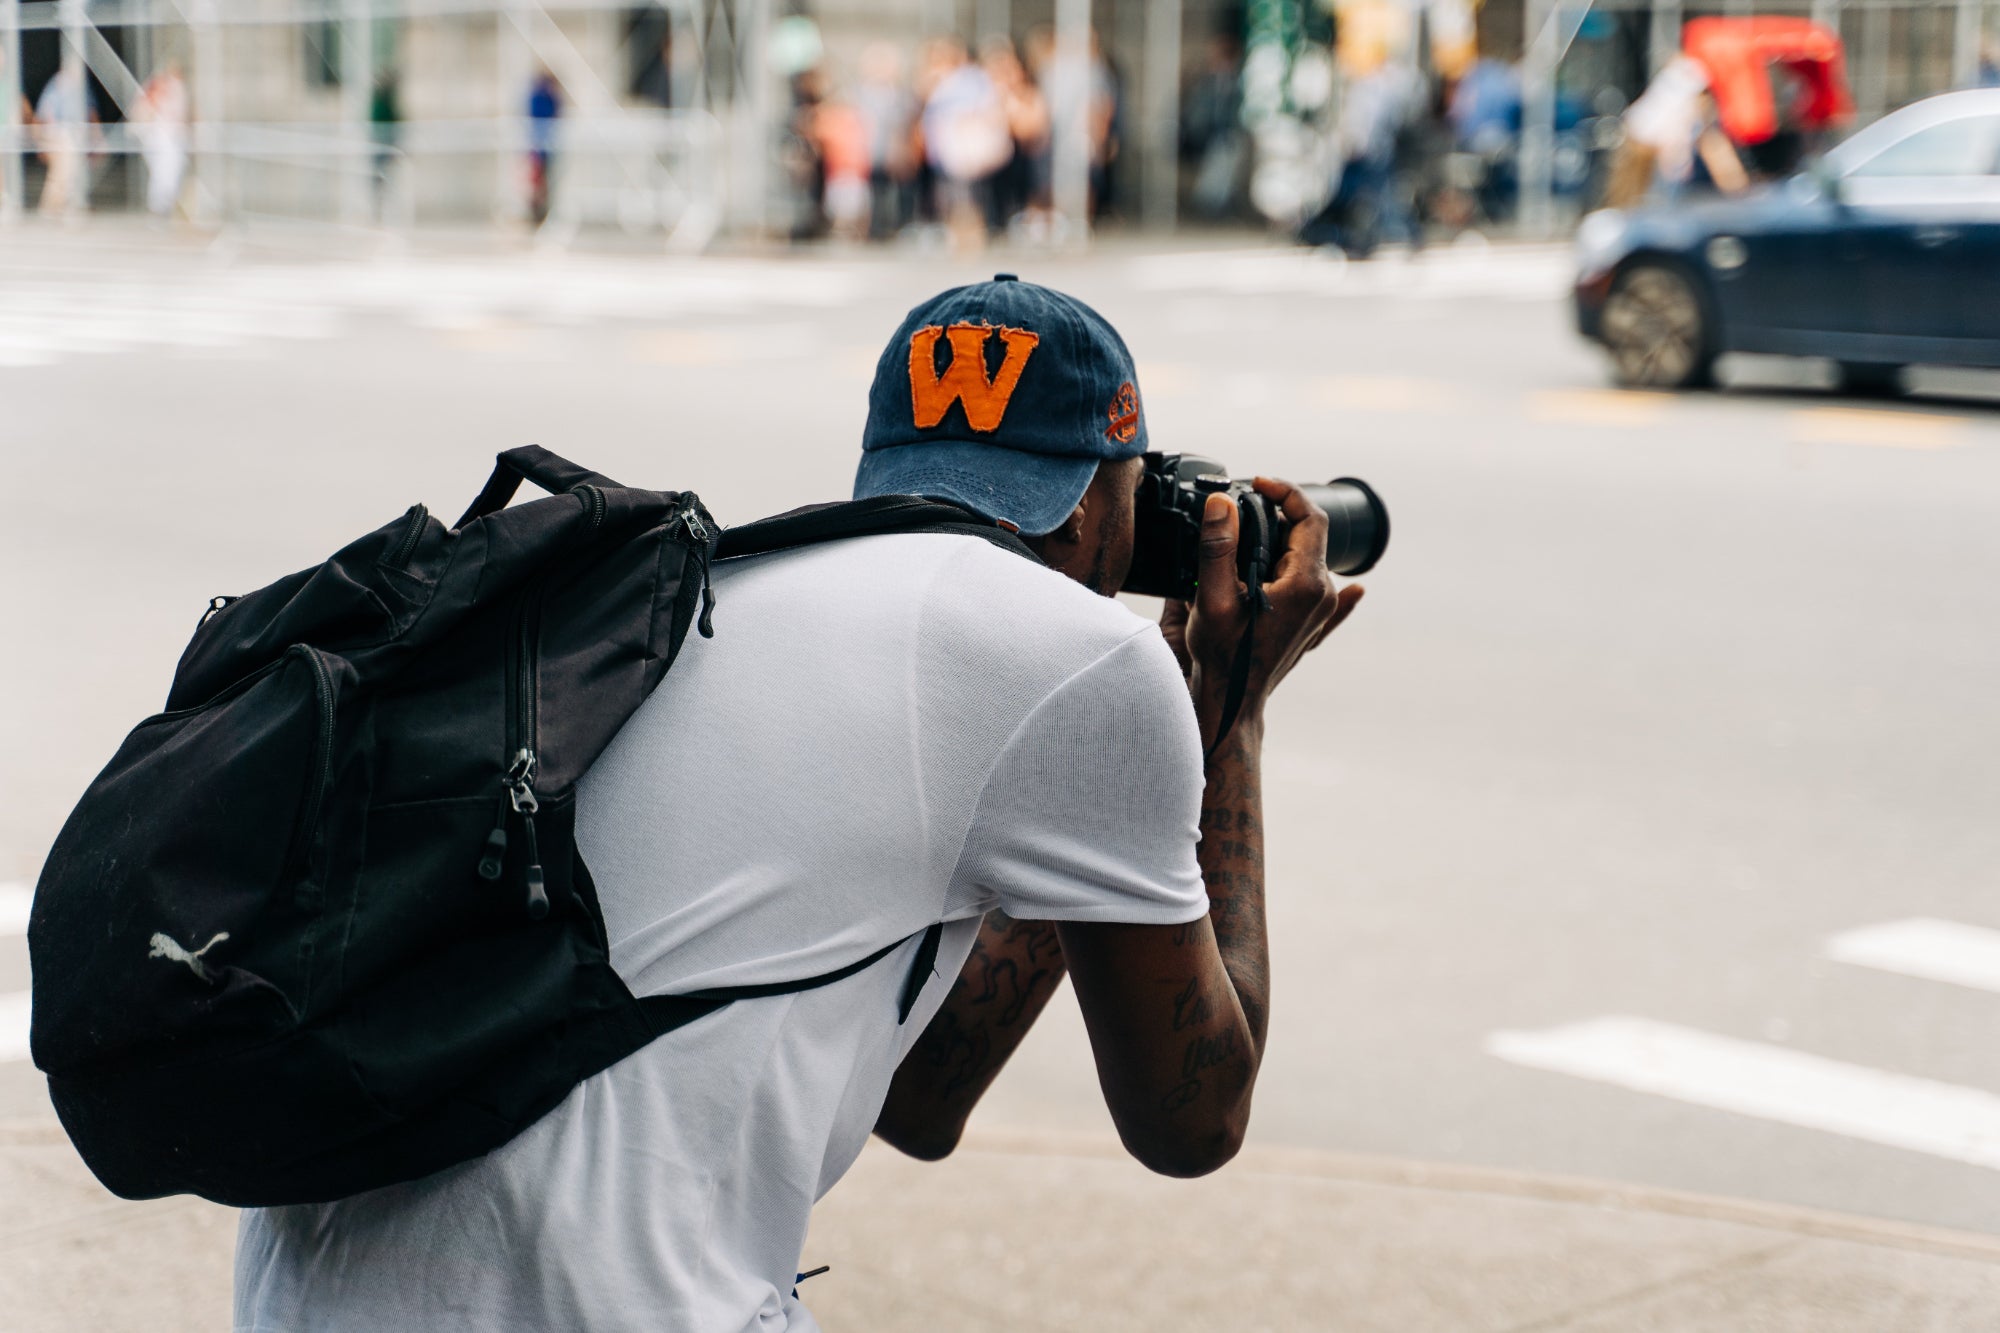 A young person photographs a city street